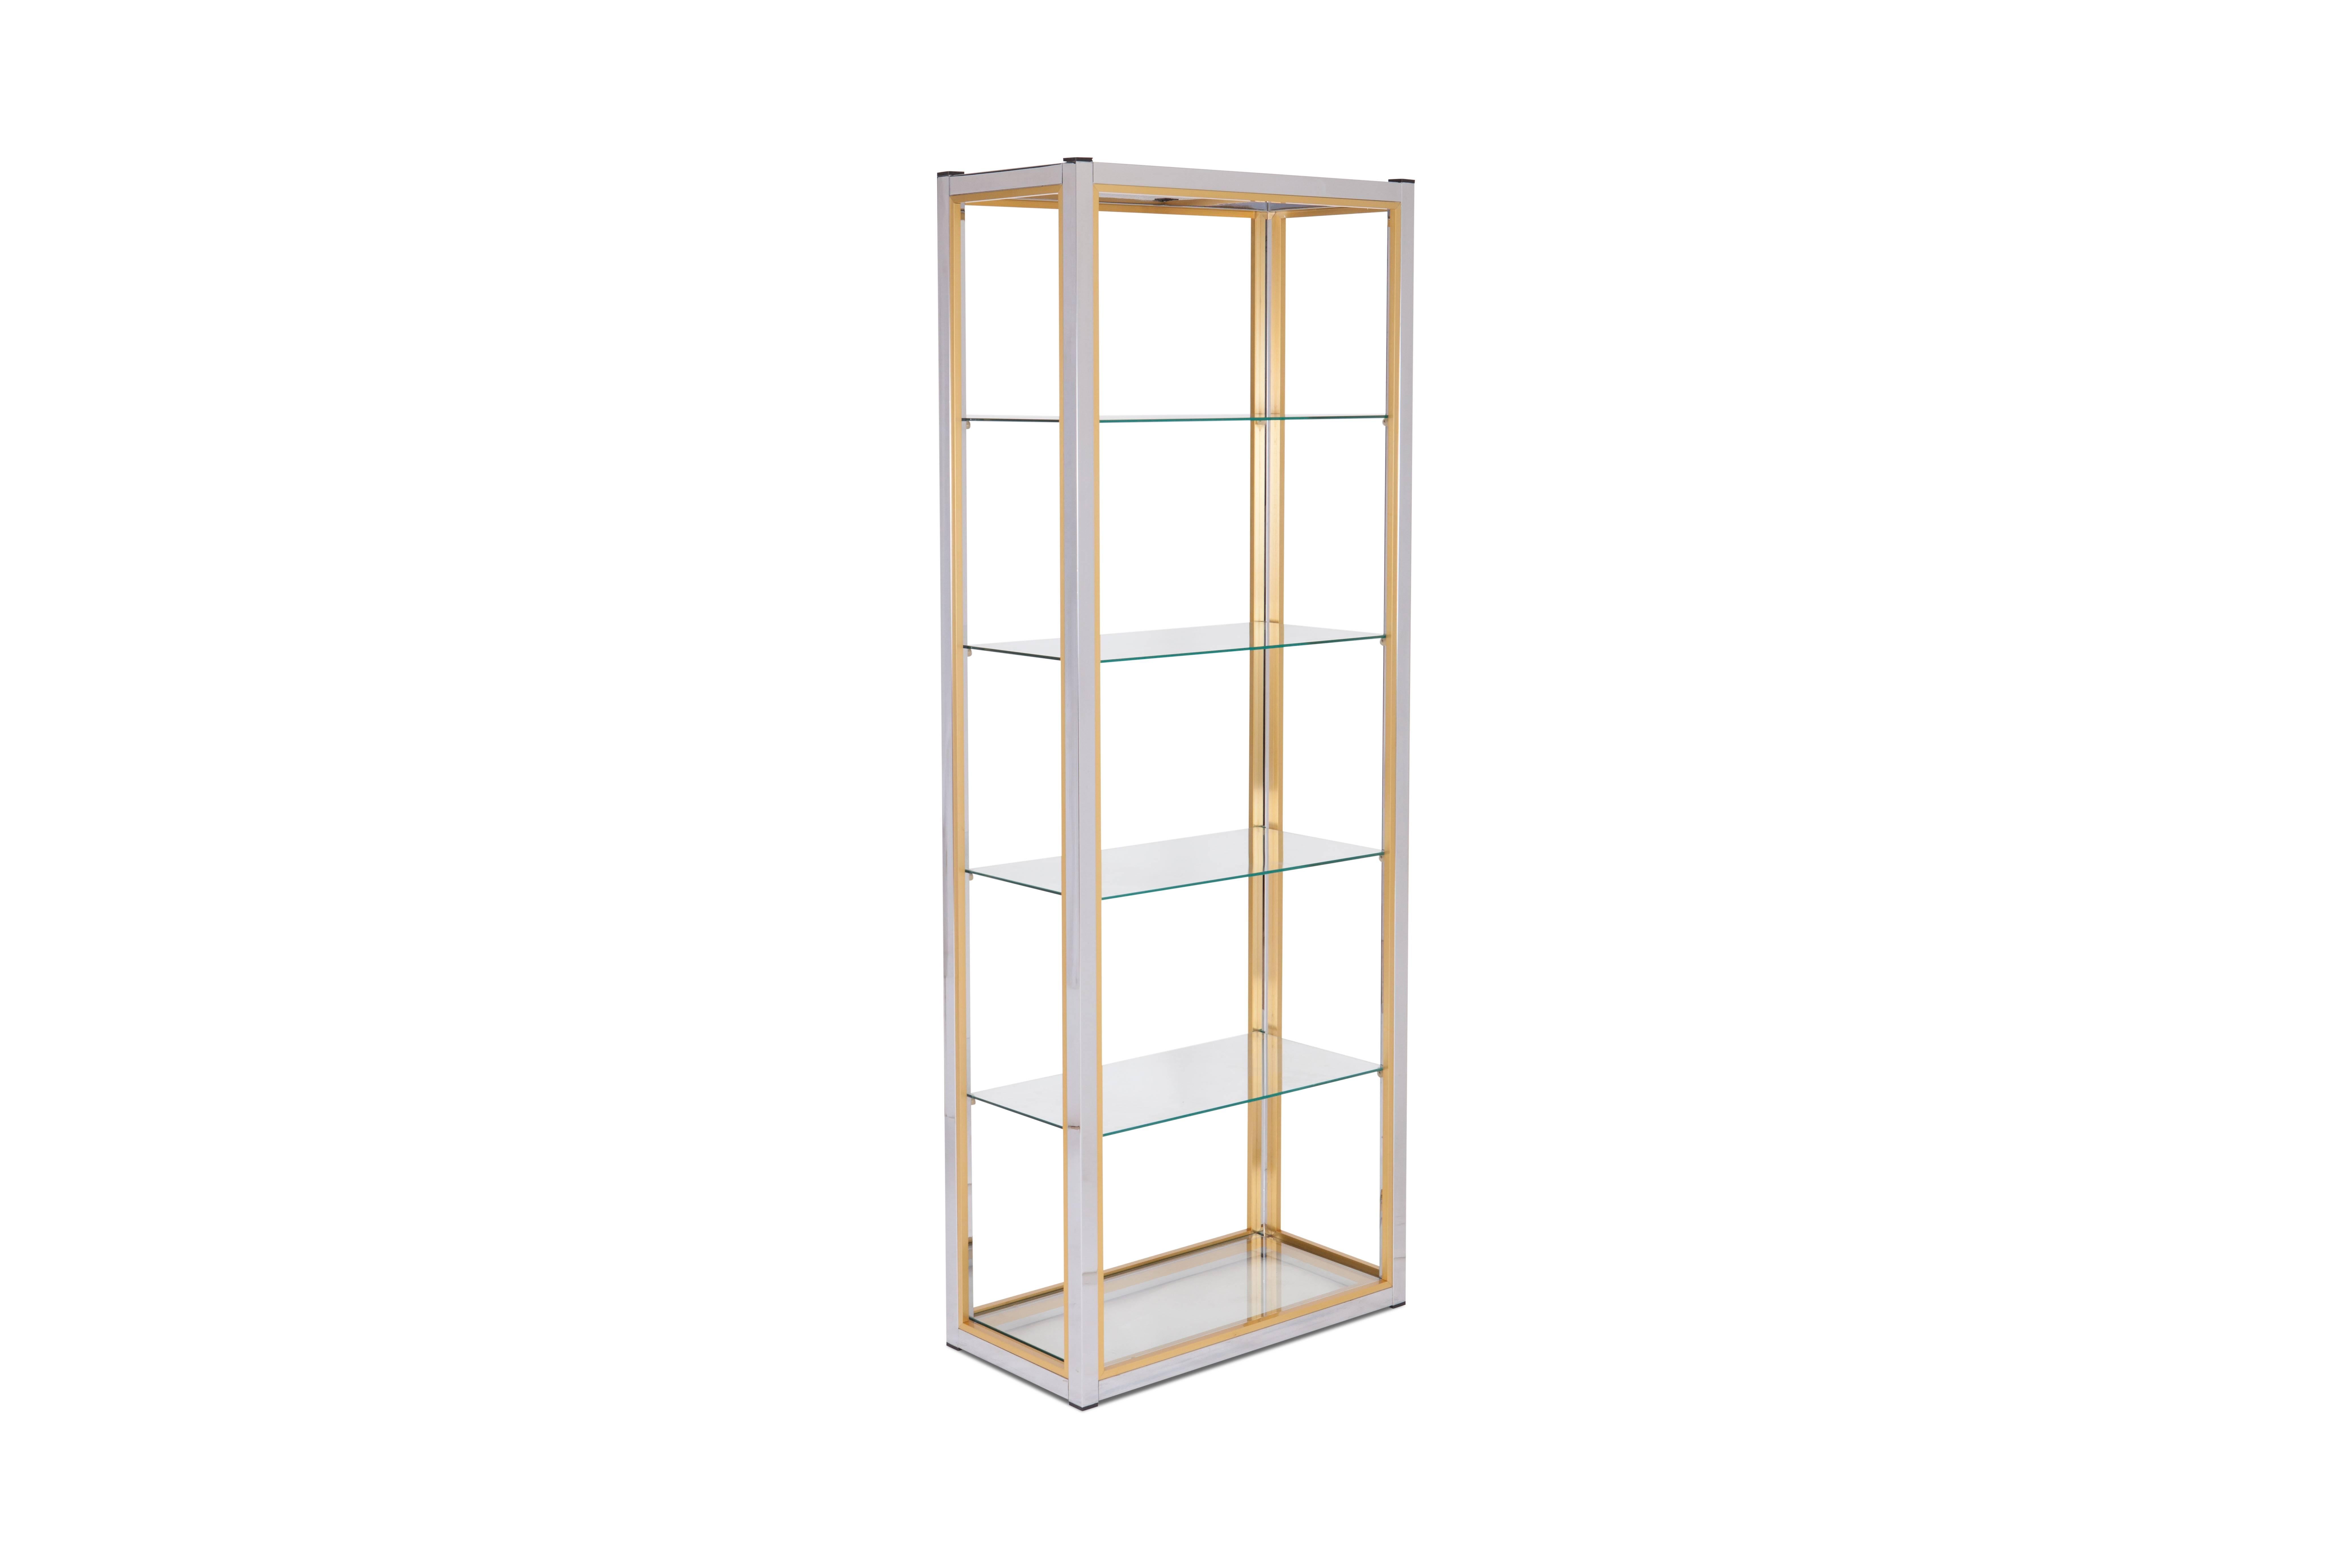 Shelve unit in Hollywood Regency style by Renato Zevi.

Chrome frame with brass details. The cabinet is provided with five glass shelves.

Measures: H 201, (between shelves 39.5) D 37, W 76 cm.